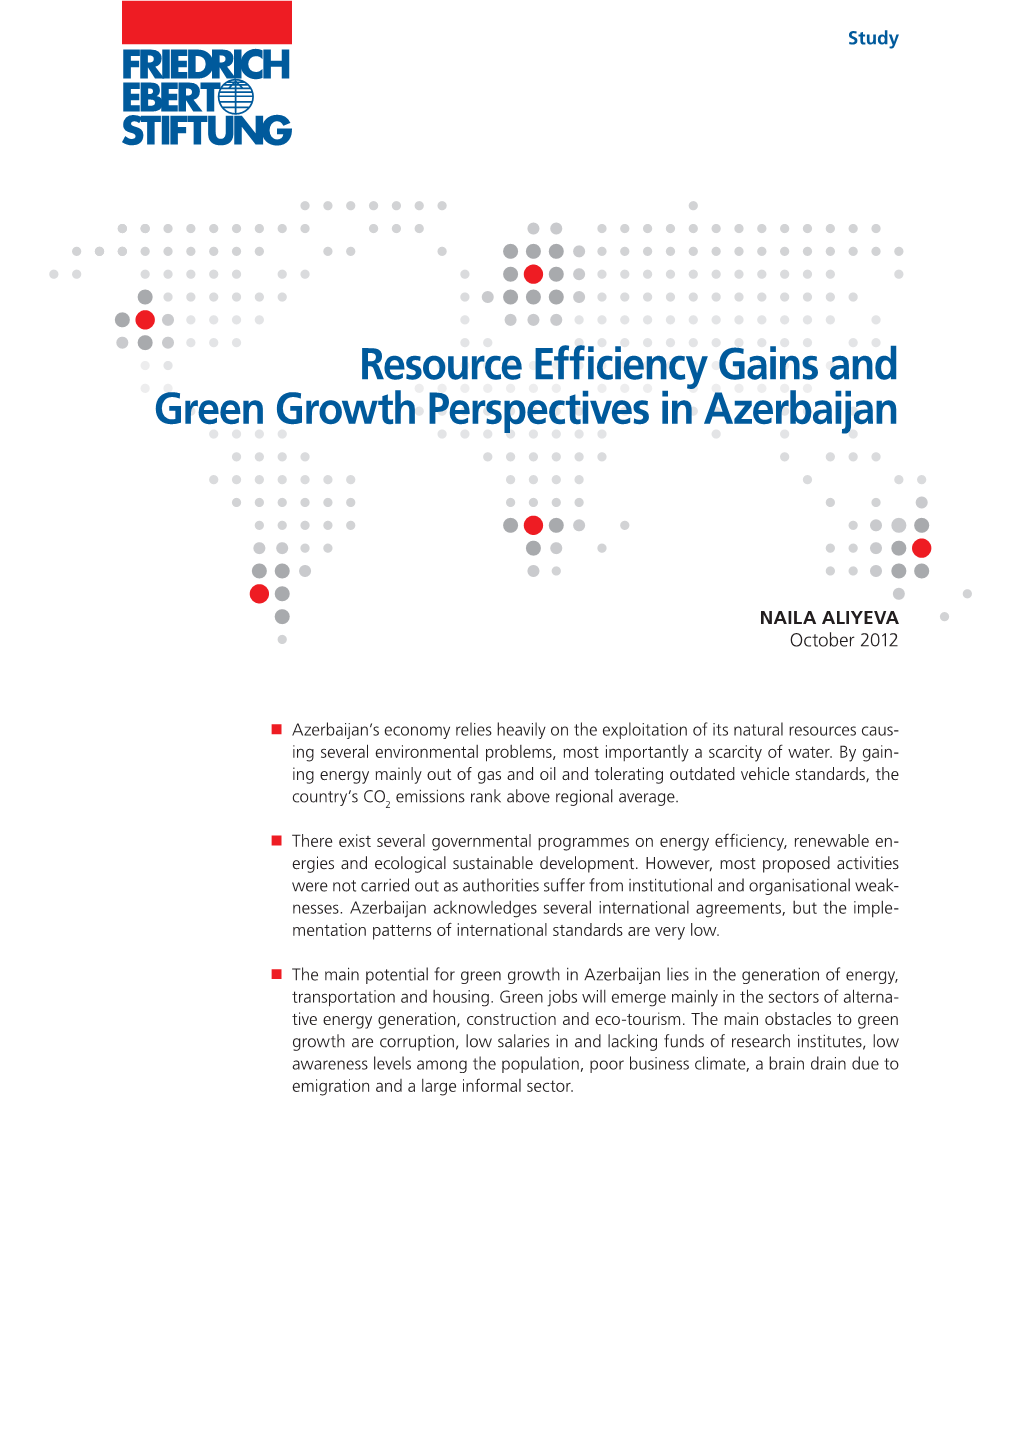 Resource Efficiency Gains and Green Growth Perspectives in Azerbaijan